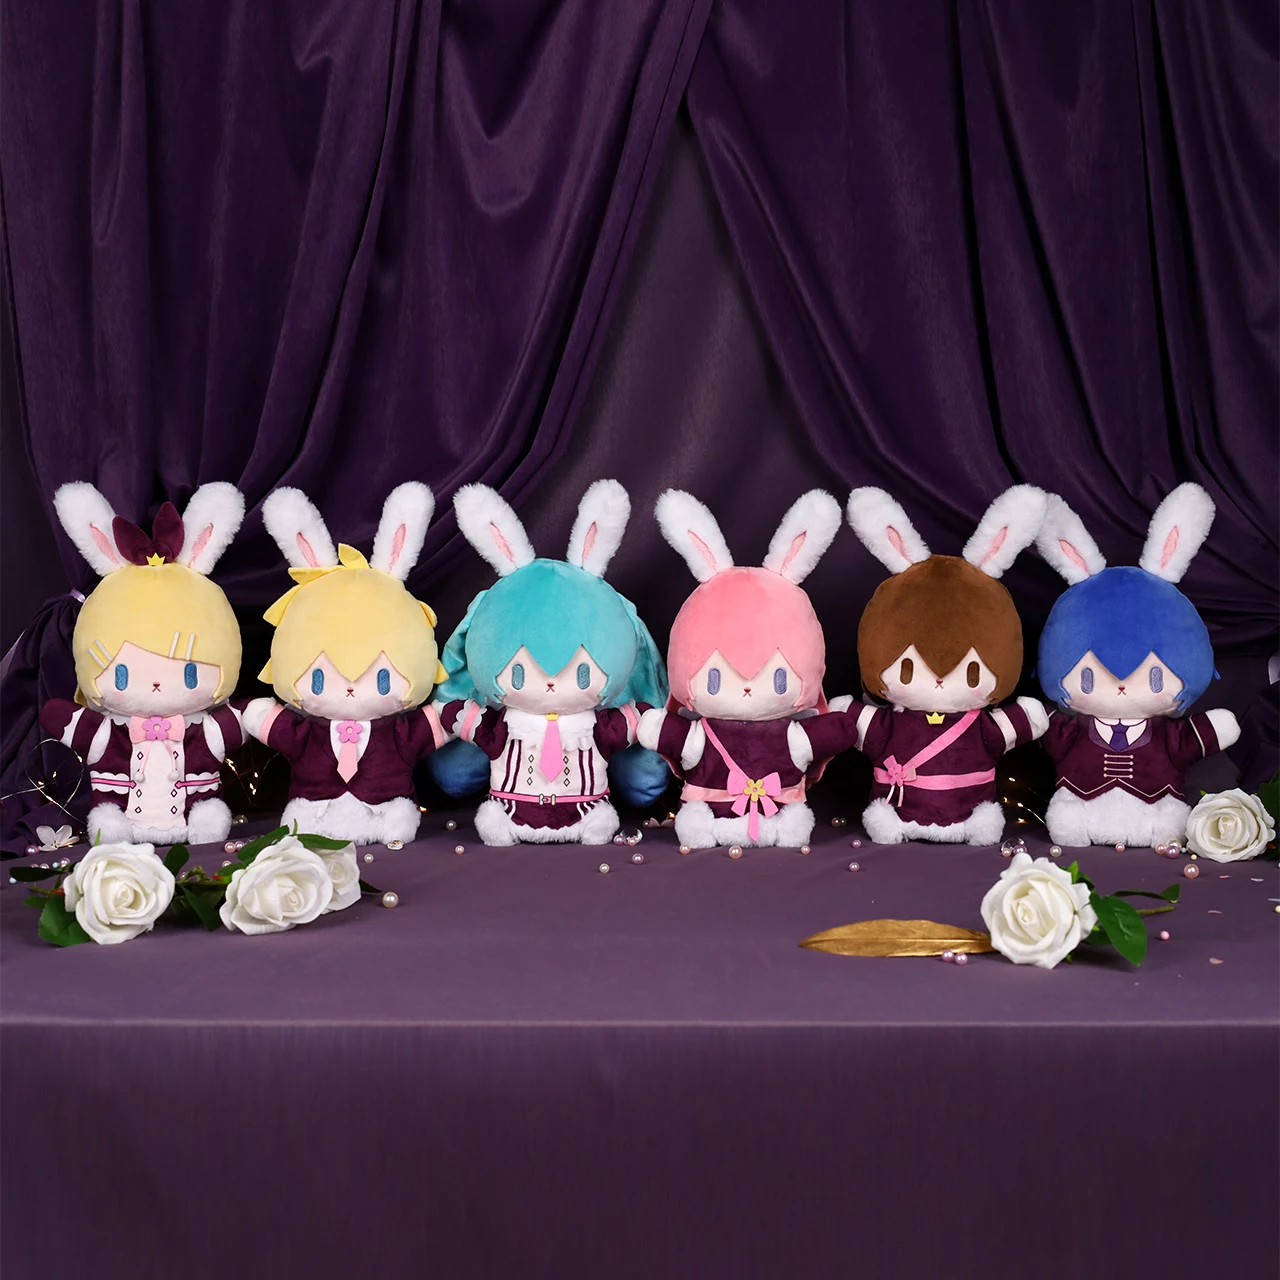 official-miku-hatsune-rin-len-puppets-hand-finger-puppet-vocaloid-cosplay-kaito-meiko-plush-stuffed-toy-anime-figure-toys